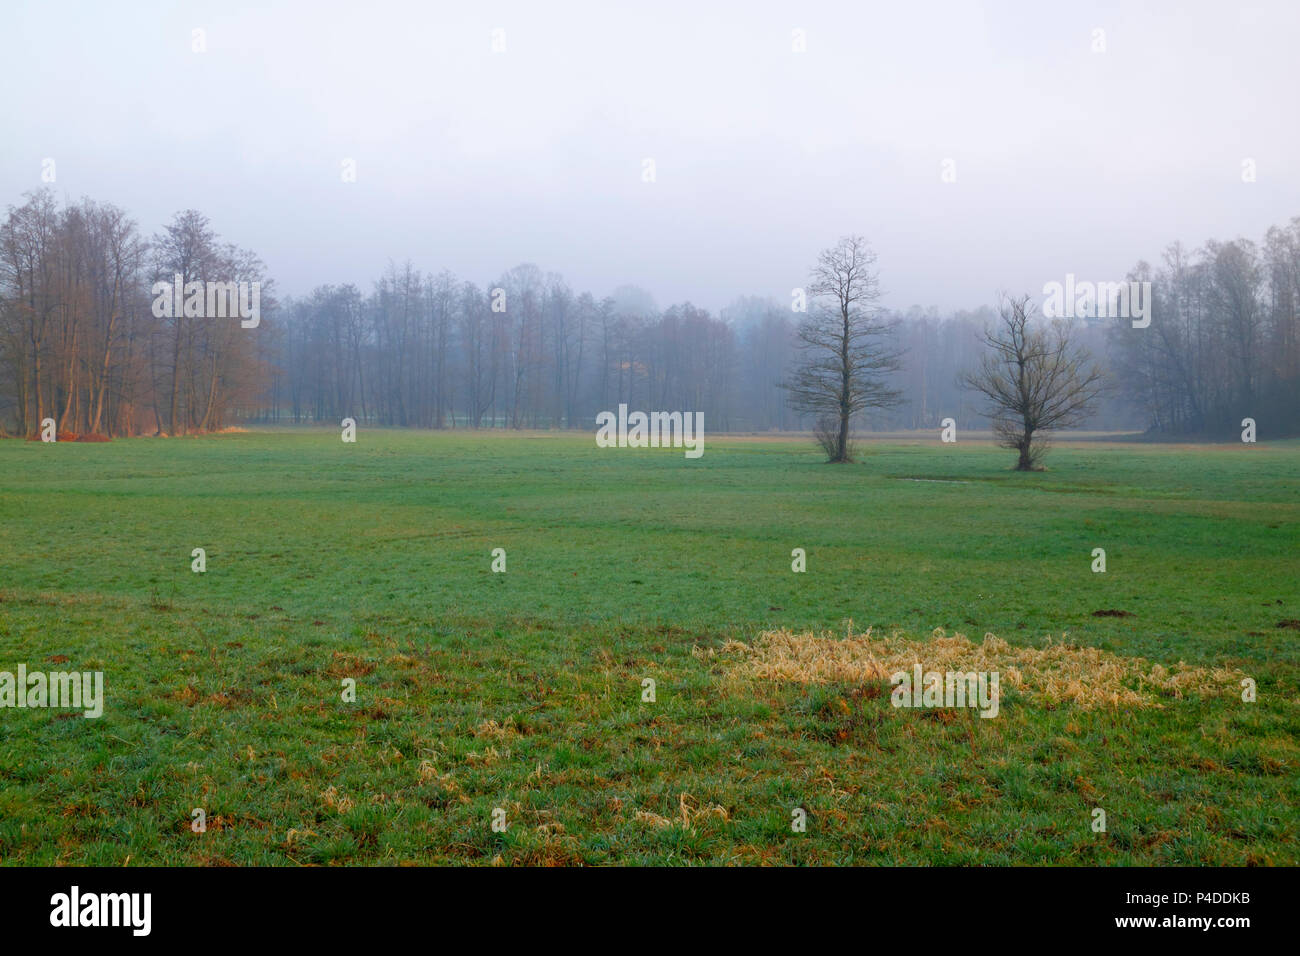 Hazy morning landscape with meadow. Poland, The Holy Cross Mountains. Stock Photo